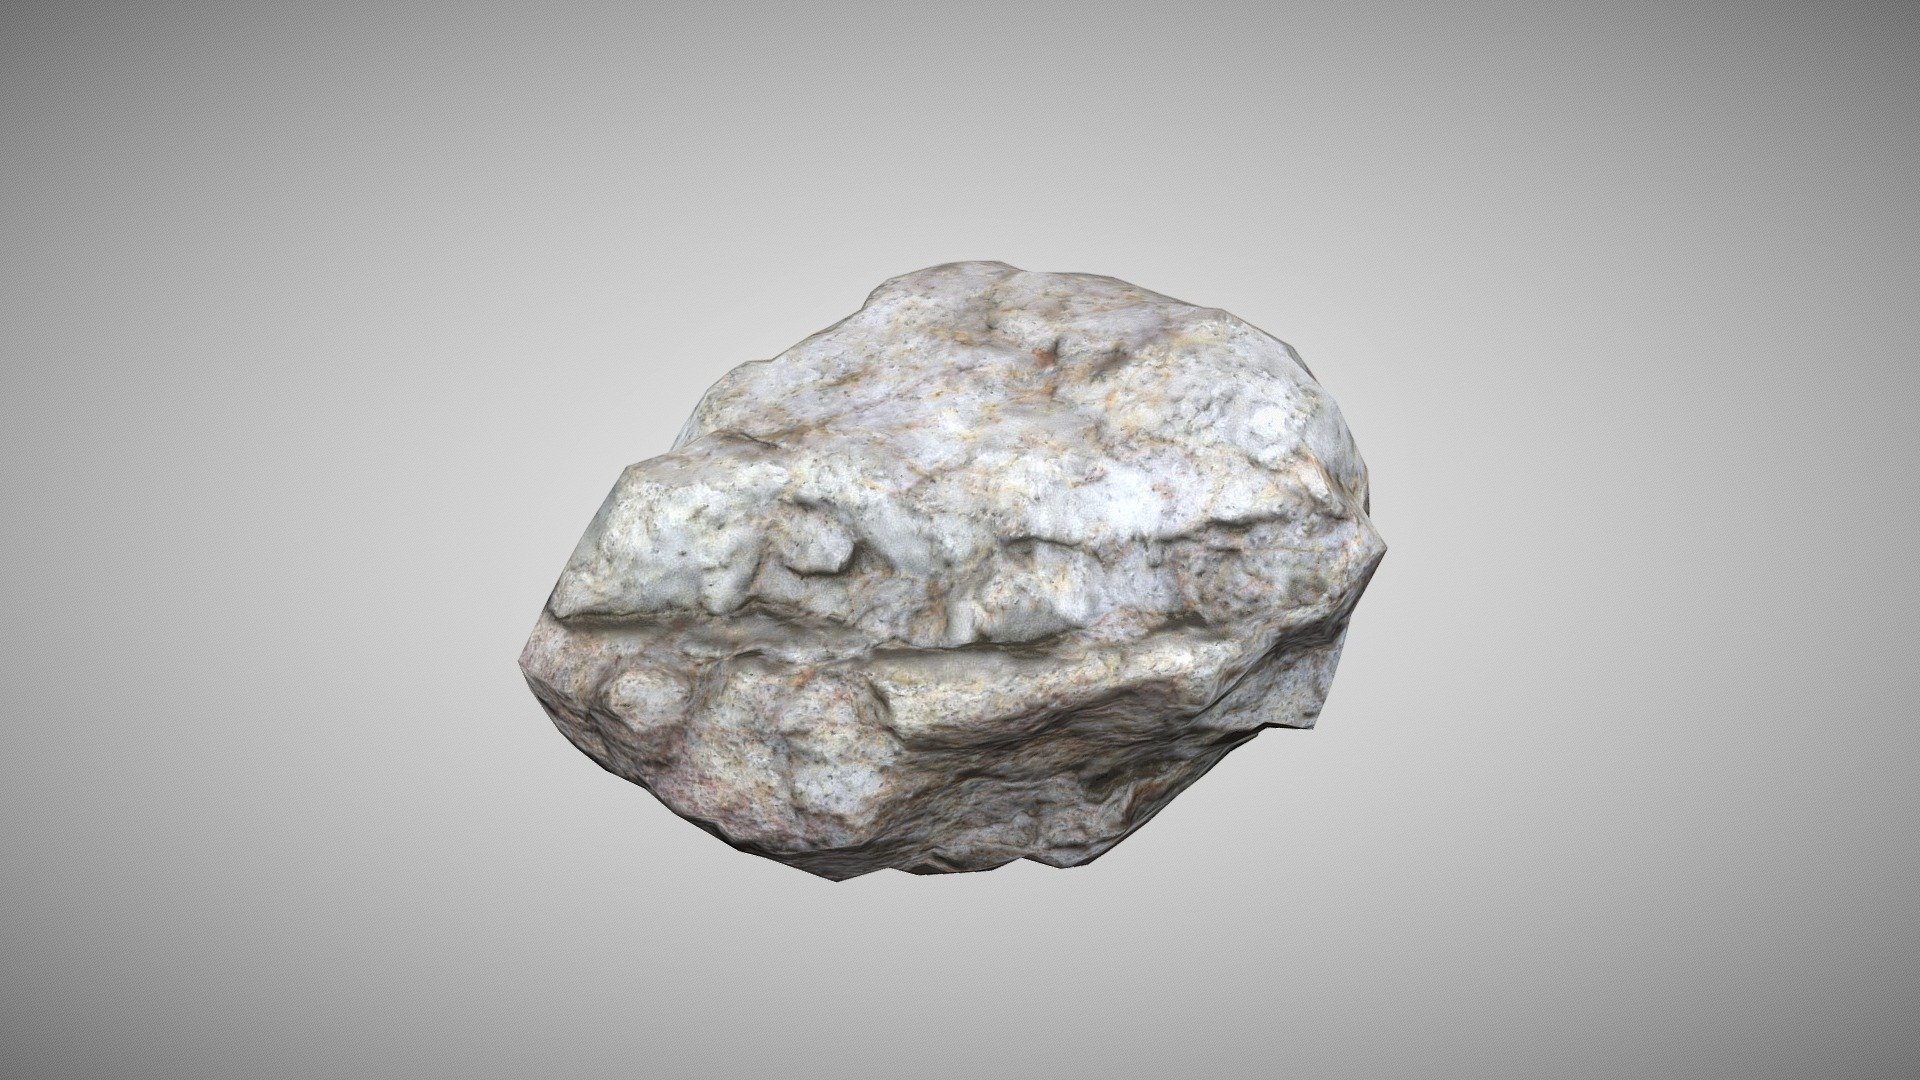 A pebble or cobble size rock that couldve been broken off of a cliffside or found in a mining pit. Its a made to be a pretty small model, and only ment to be a filler in areas where small stones can be found. The Bottom is blurred due to high to low poly texture.

Was created in Maya using a smoothed square and formed around a Photogrammetry Highpoly model. 
The texture was applied in Substance Painter, by taking the high poly and wrapping its texture around the lowpoly.

Made for Homework at Waketech 3d model